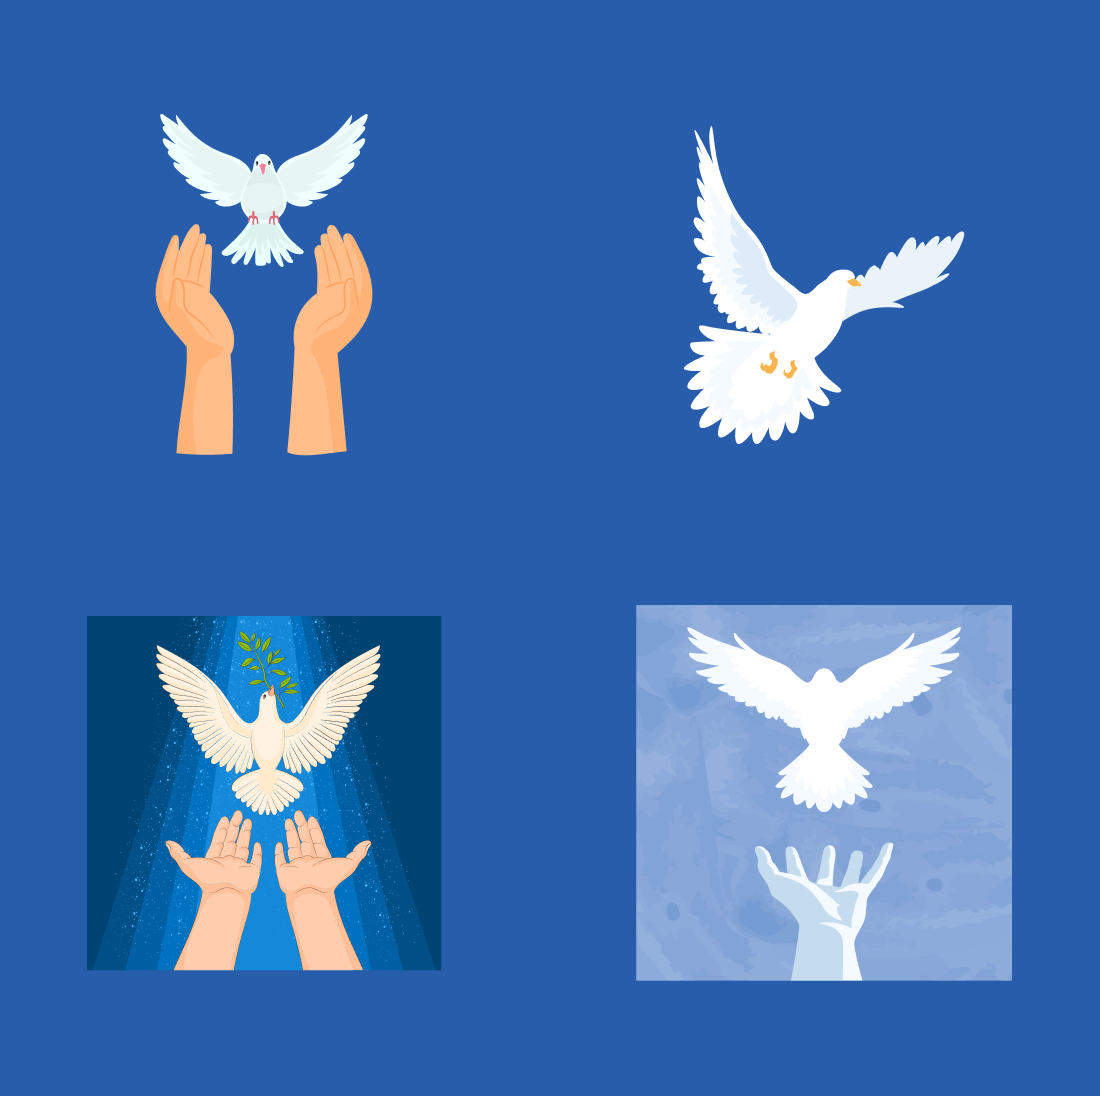 Series of four images with hands holding doves.